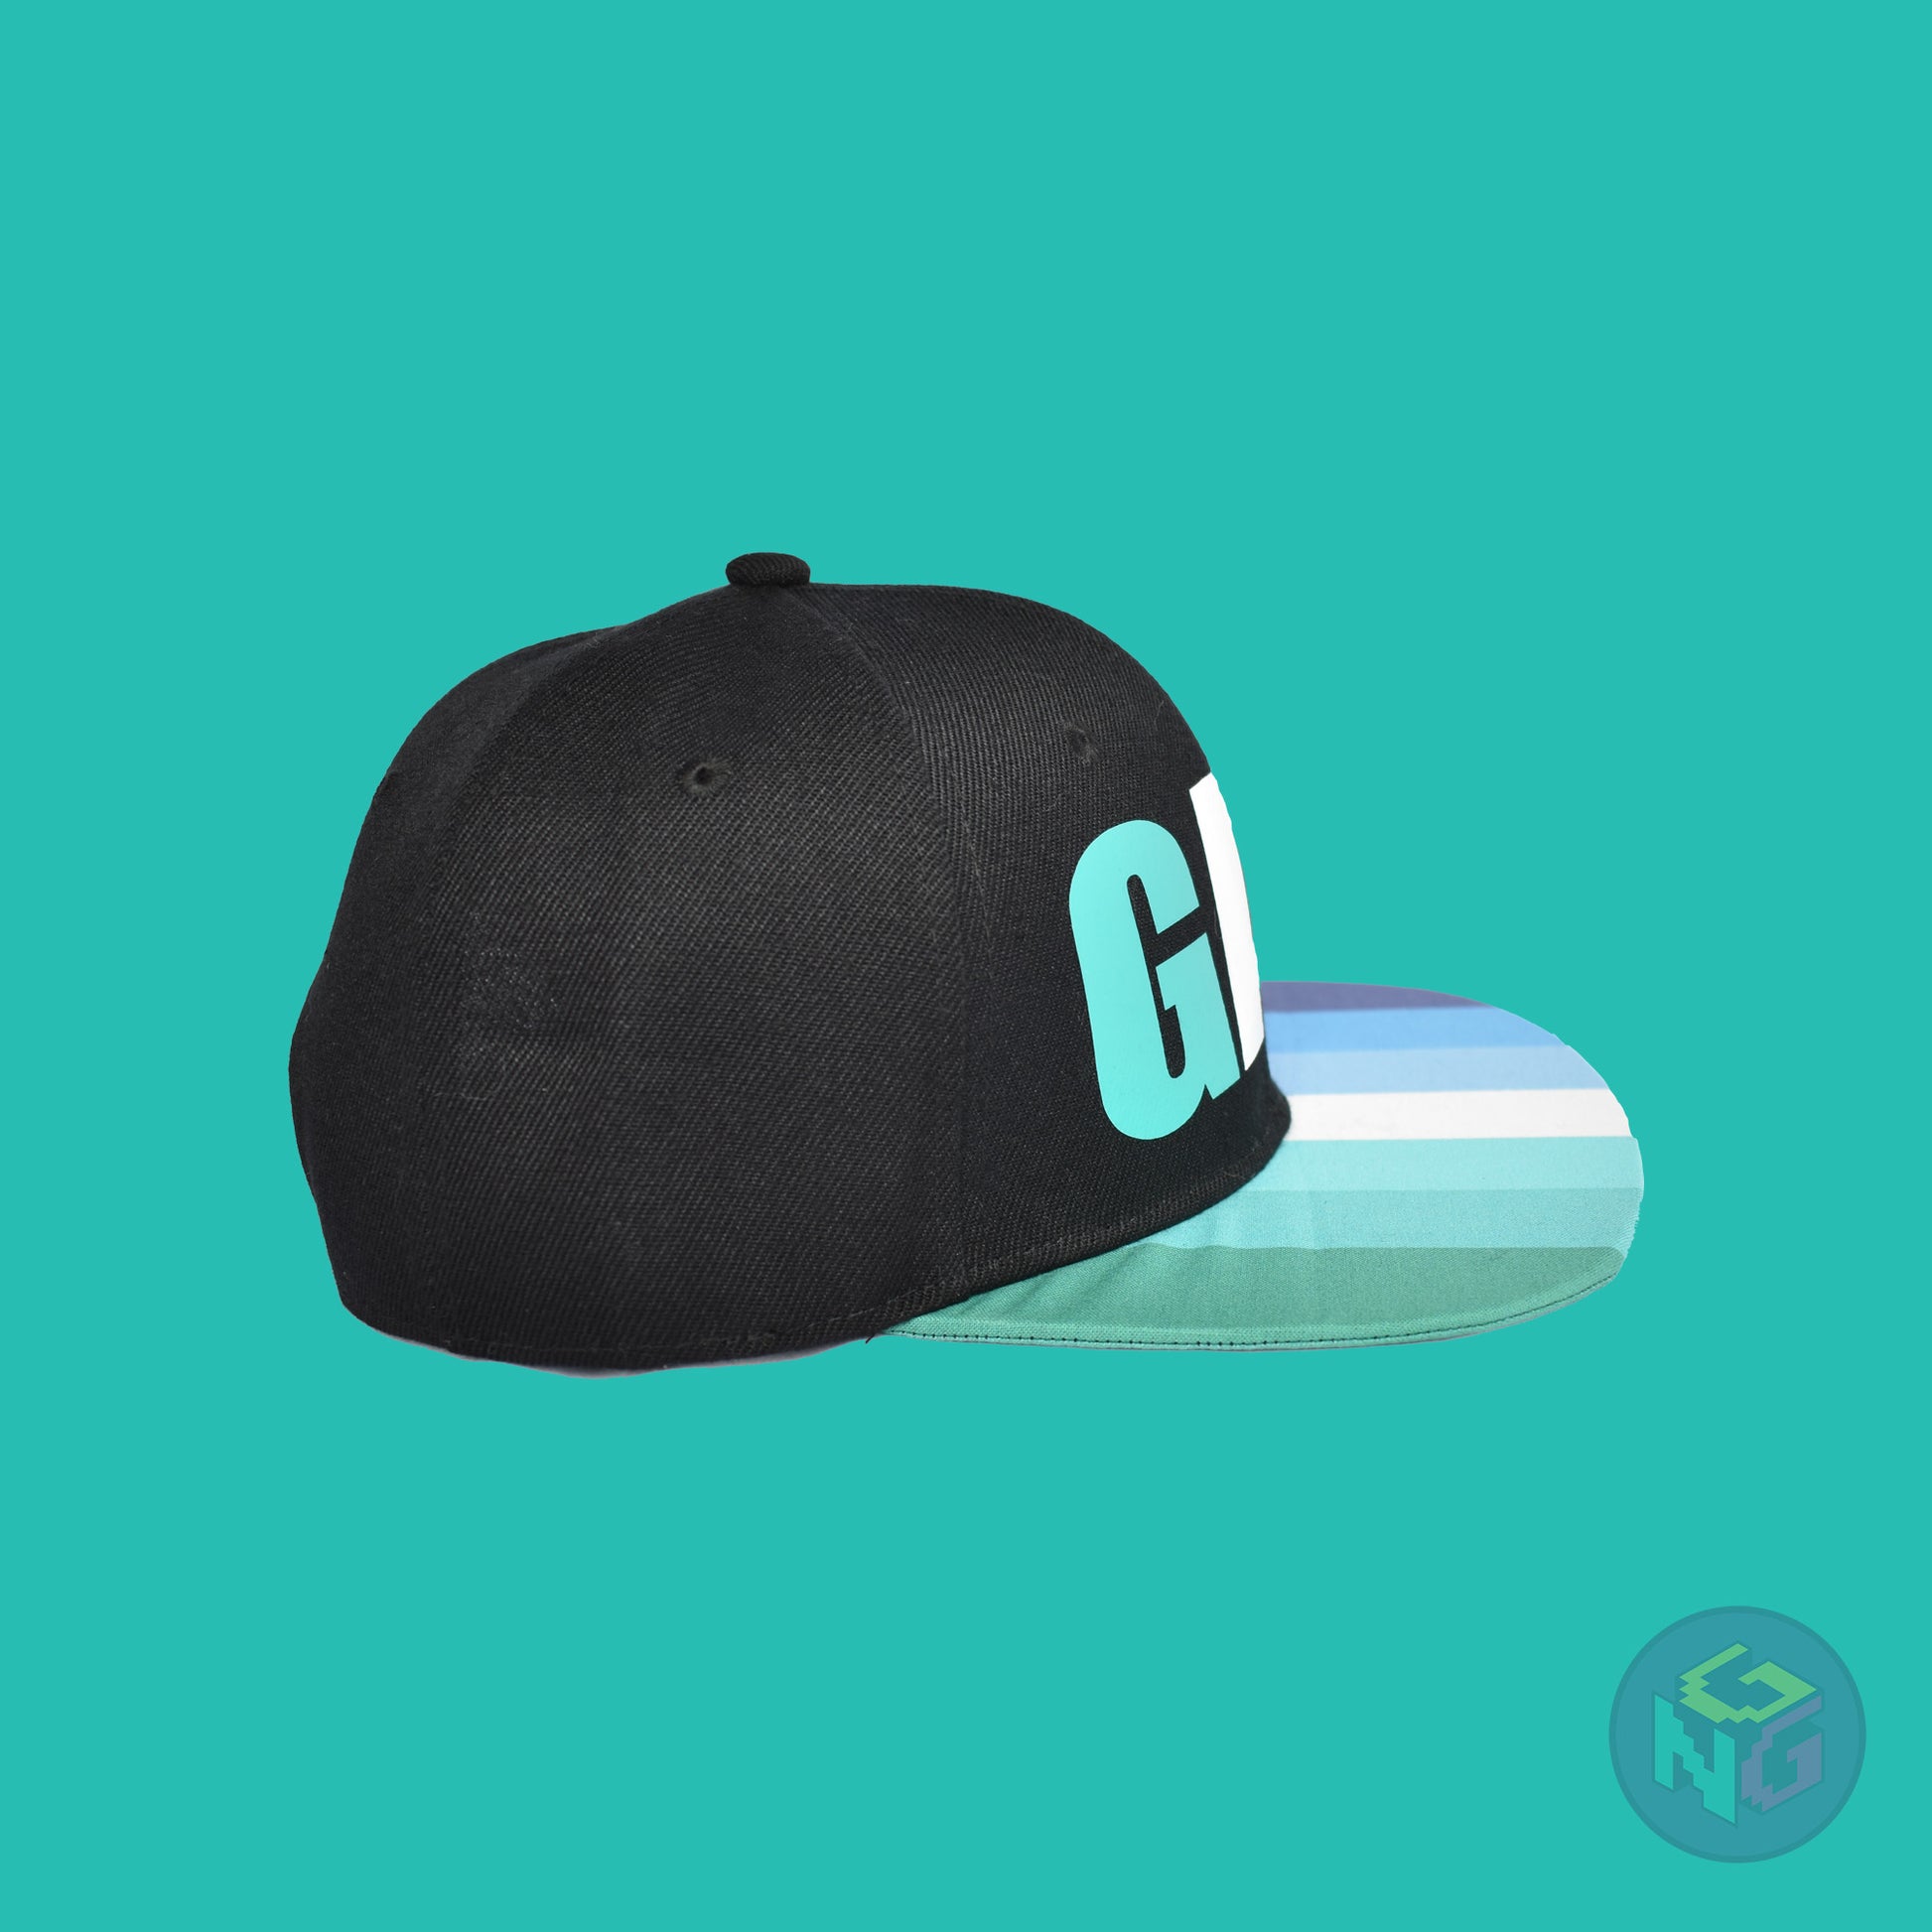 Black flat bill snapback hat. The brim has the gay pride flag on both sides and the front of the hat has the word “GAY” in turquoises, blues, and white. Right view